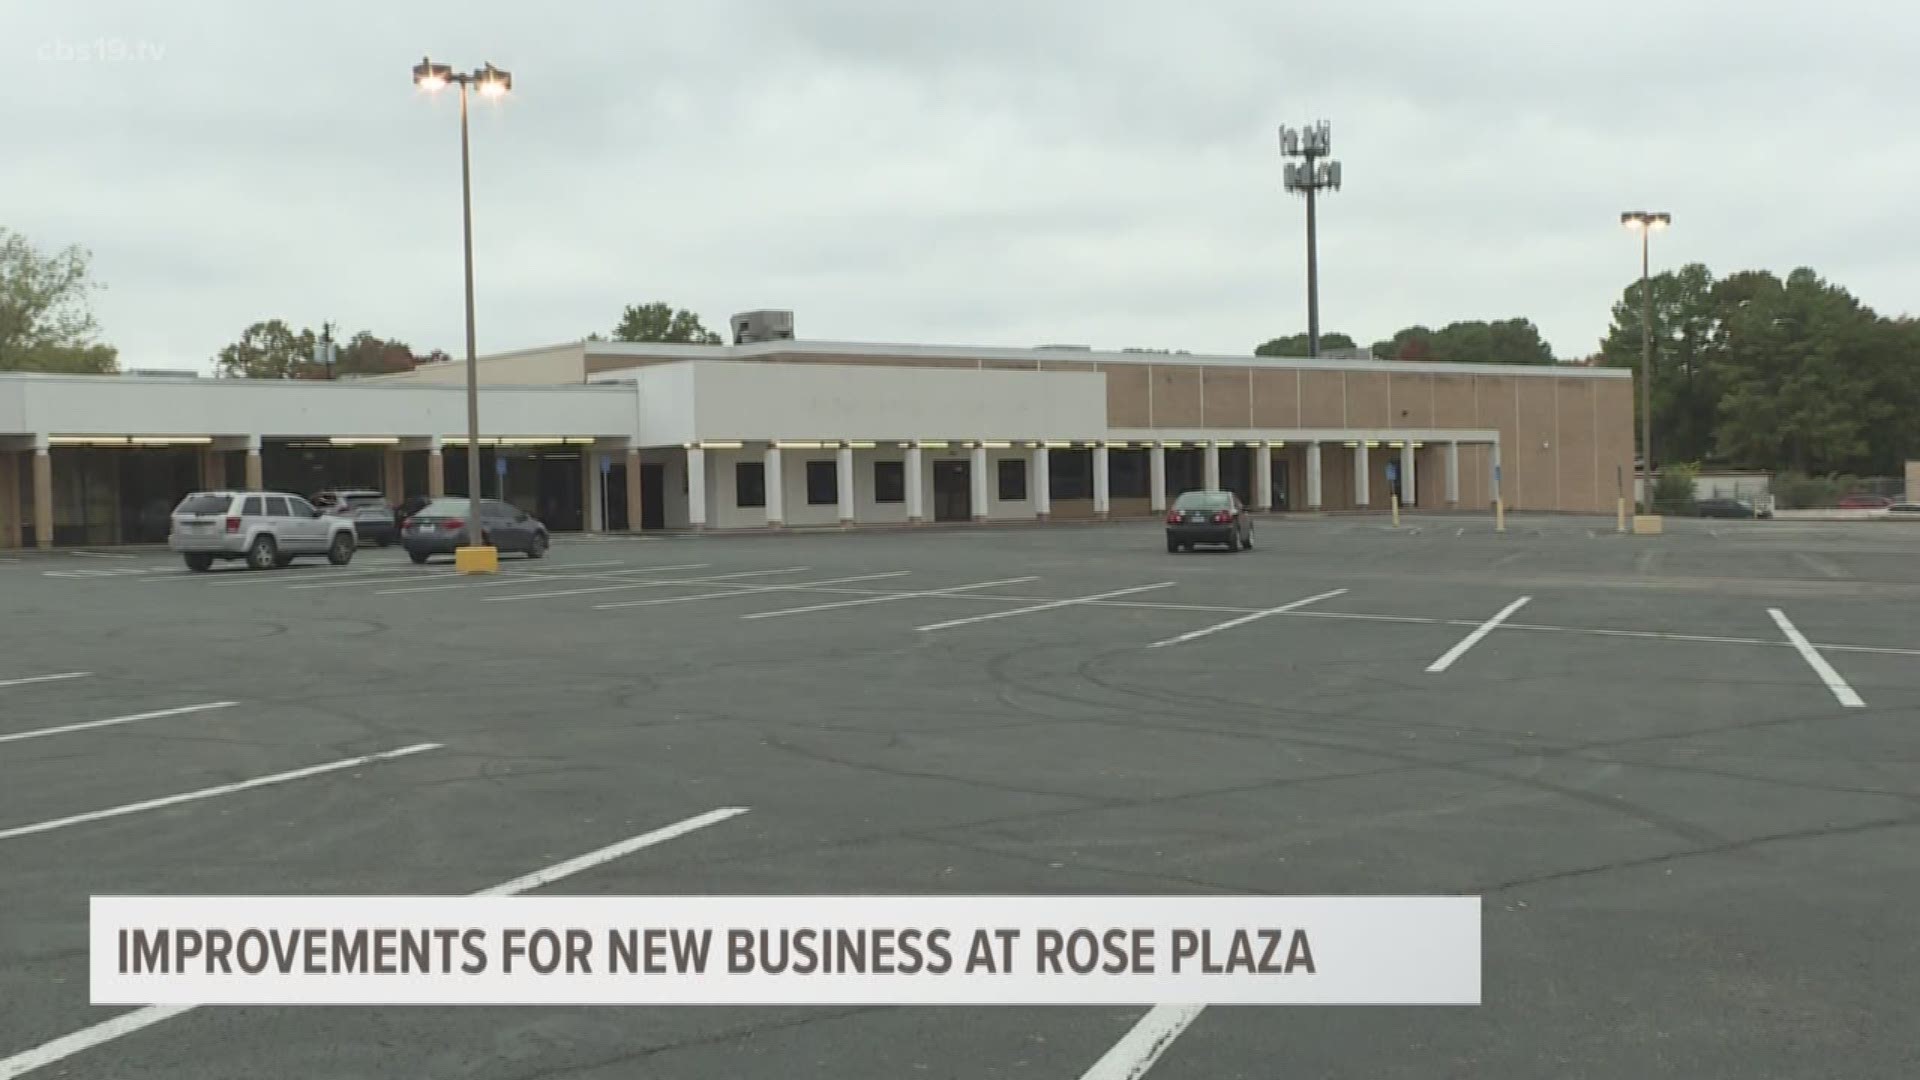 Improvements to the Rose Plaza Shopping Center are being discussed ahead of a new business opening in the former Hastings Entertainment building.